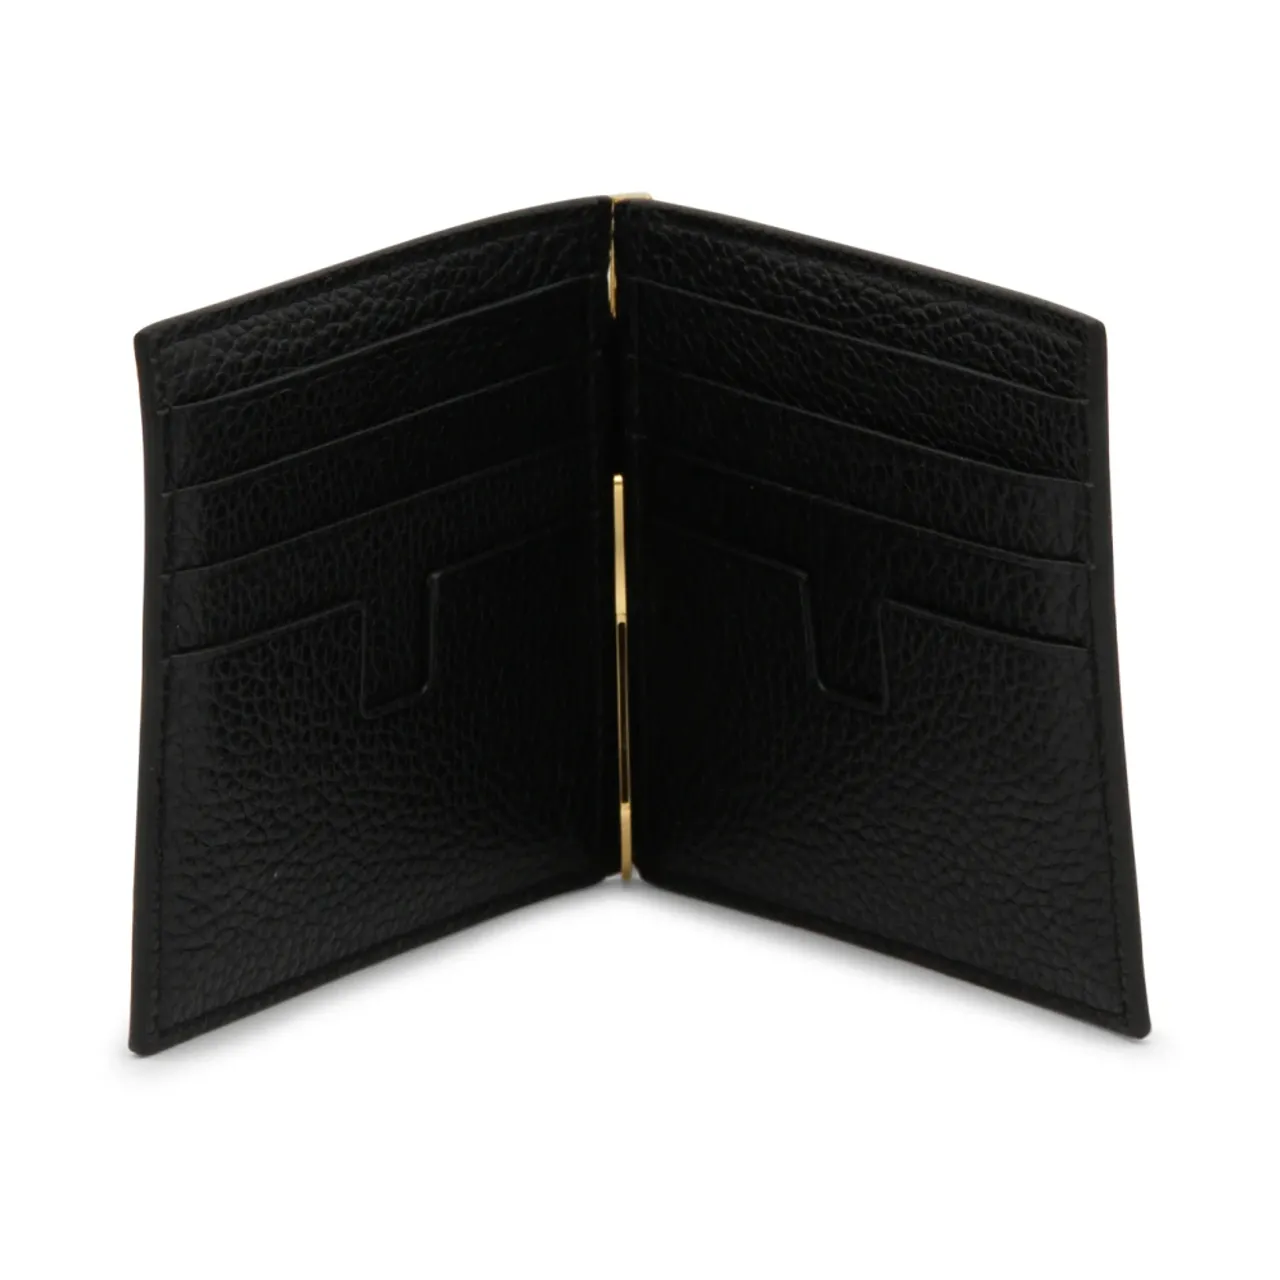 Tom Ford , Black Leather Wallet with Logo Stamp ,Black male, Sizes: ONE SIZE